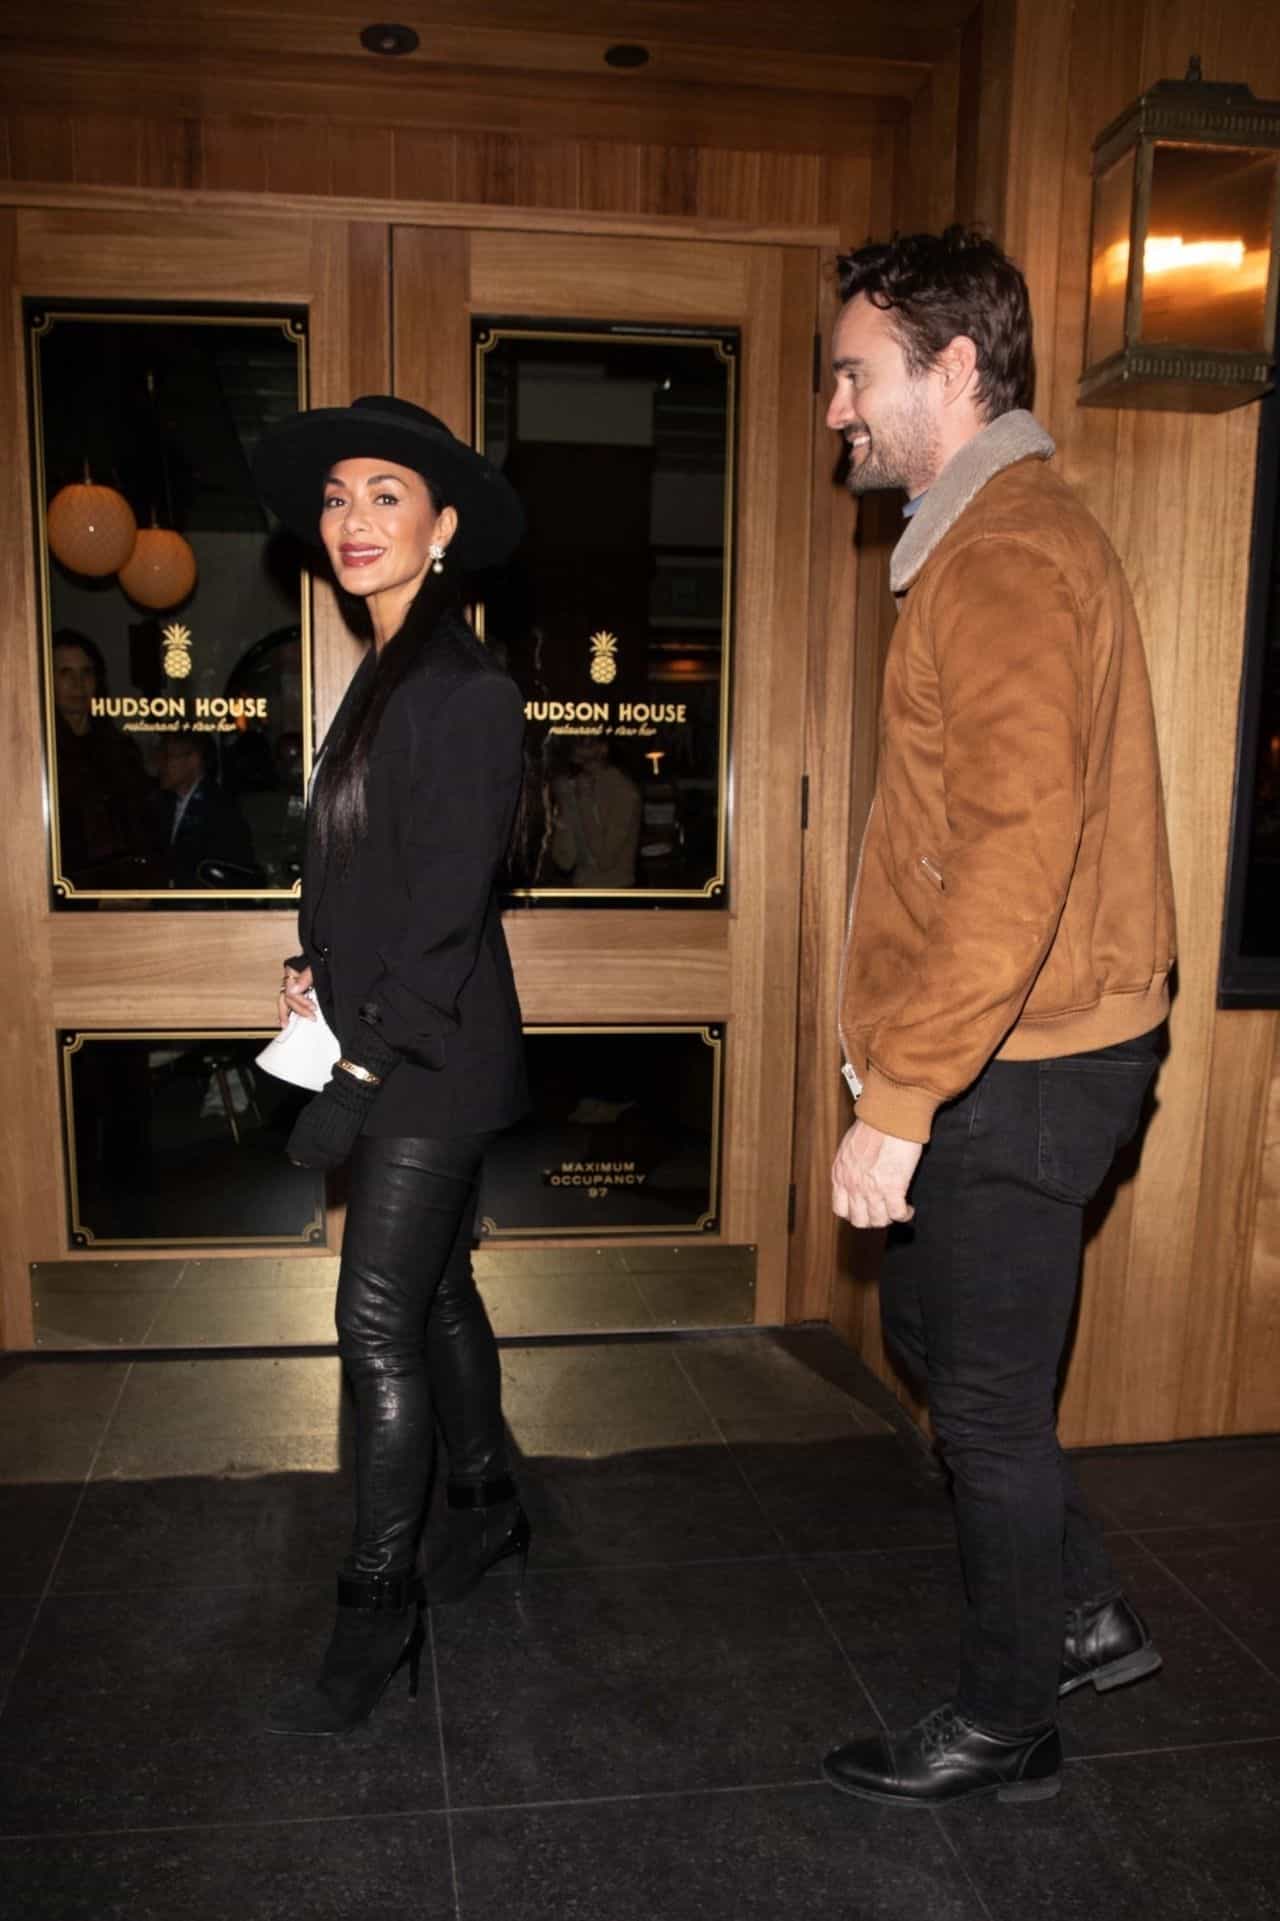 Nicole Scherzinger Rocks Stylish Outfit for Cozy Date with Thom Evans